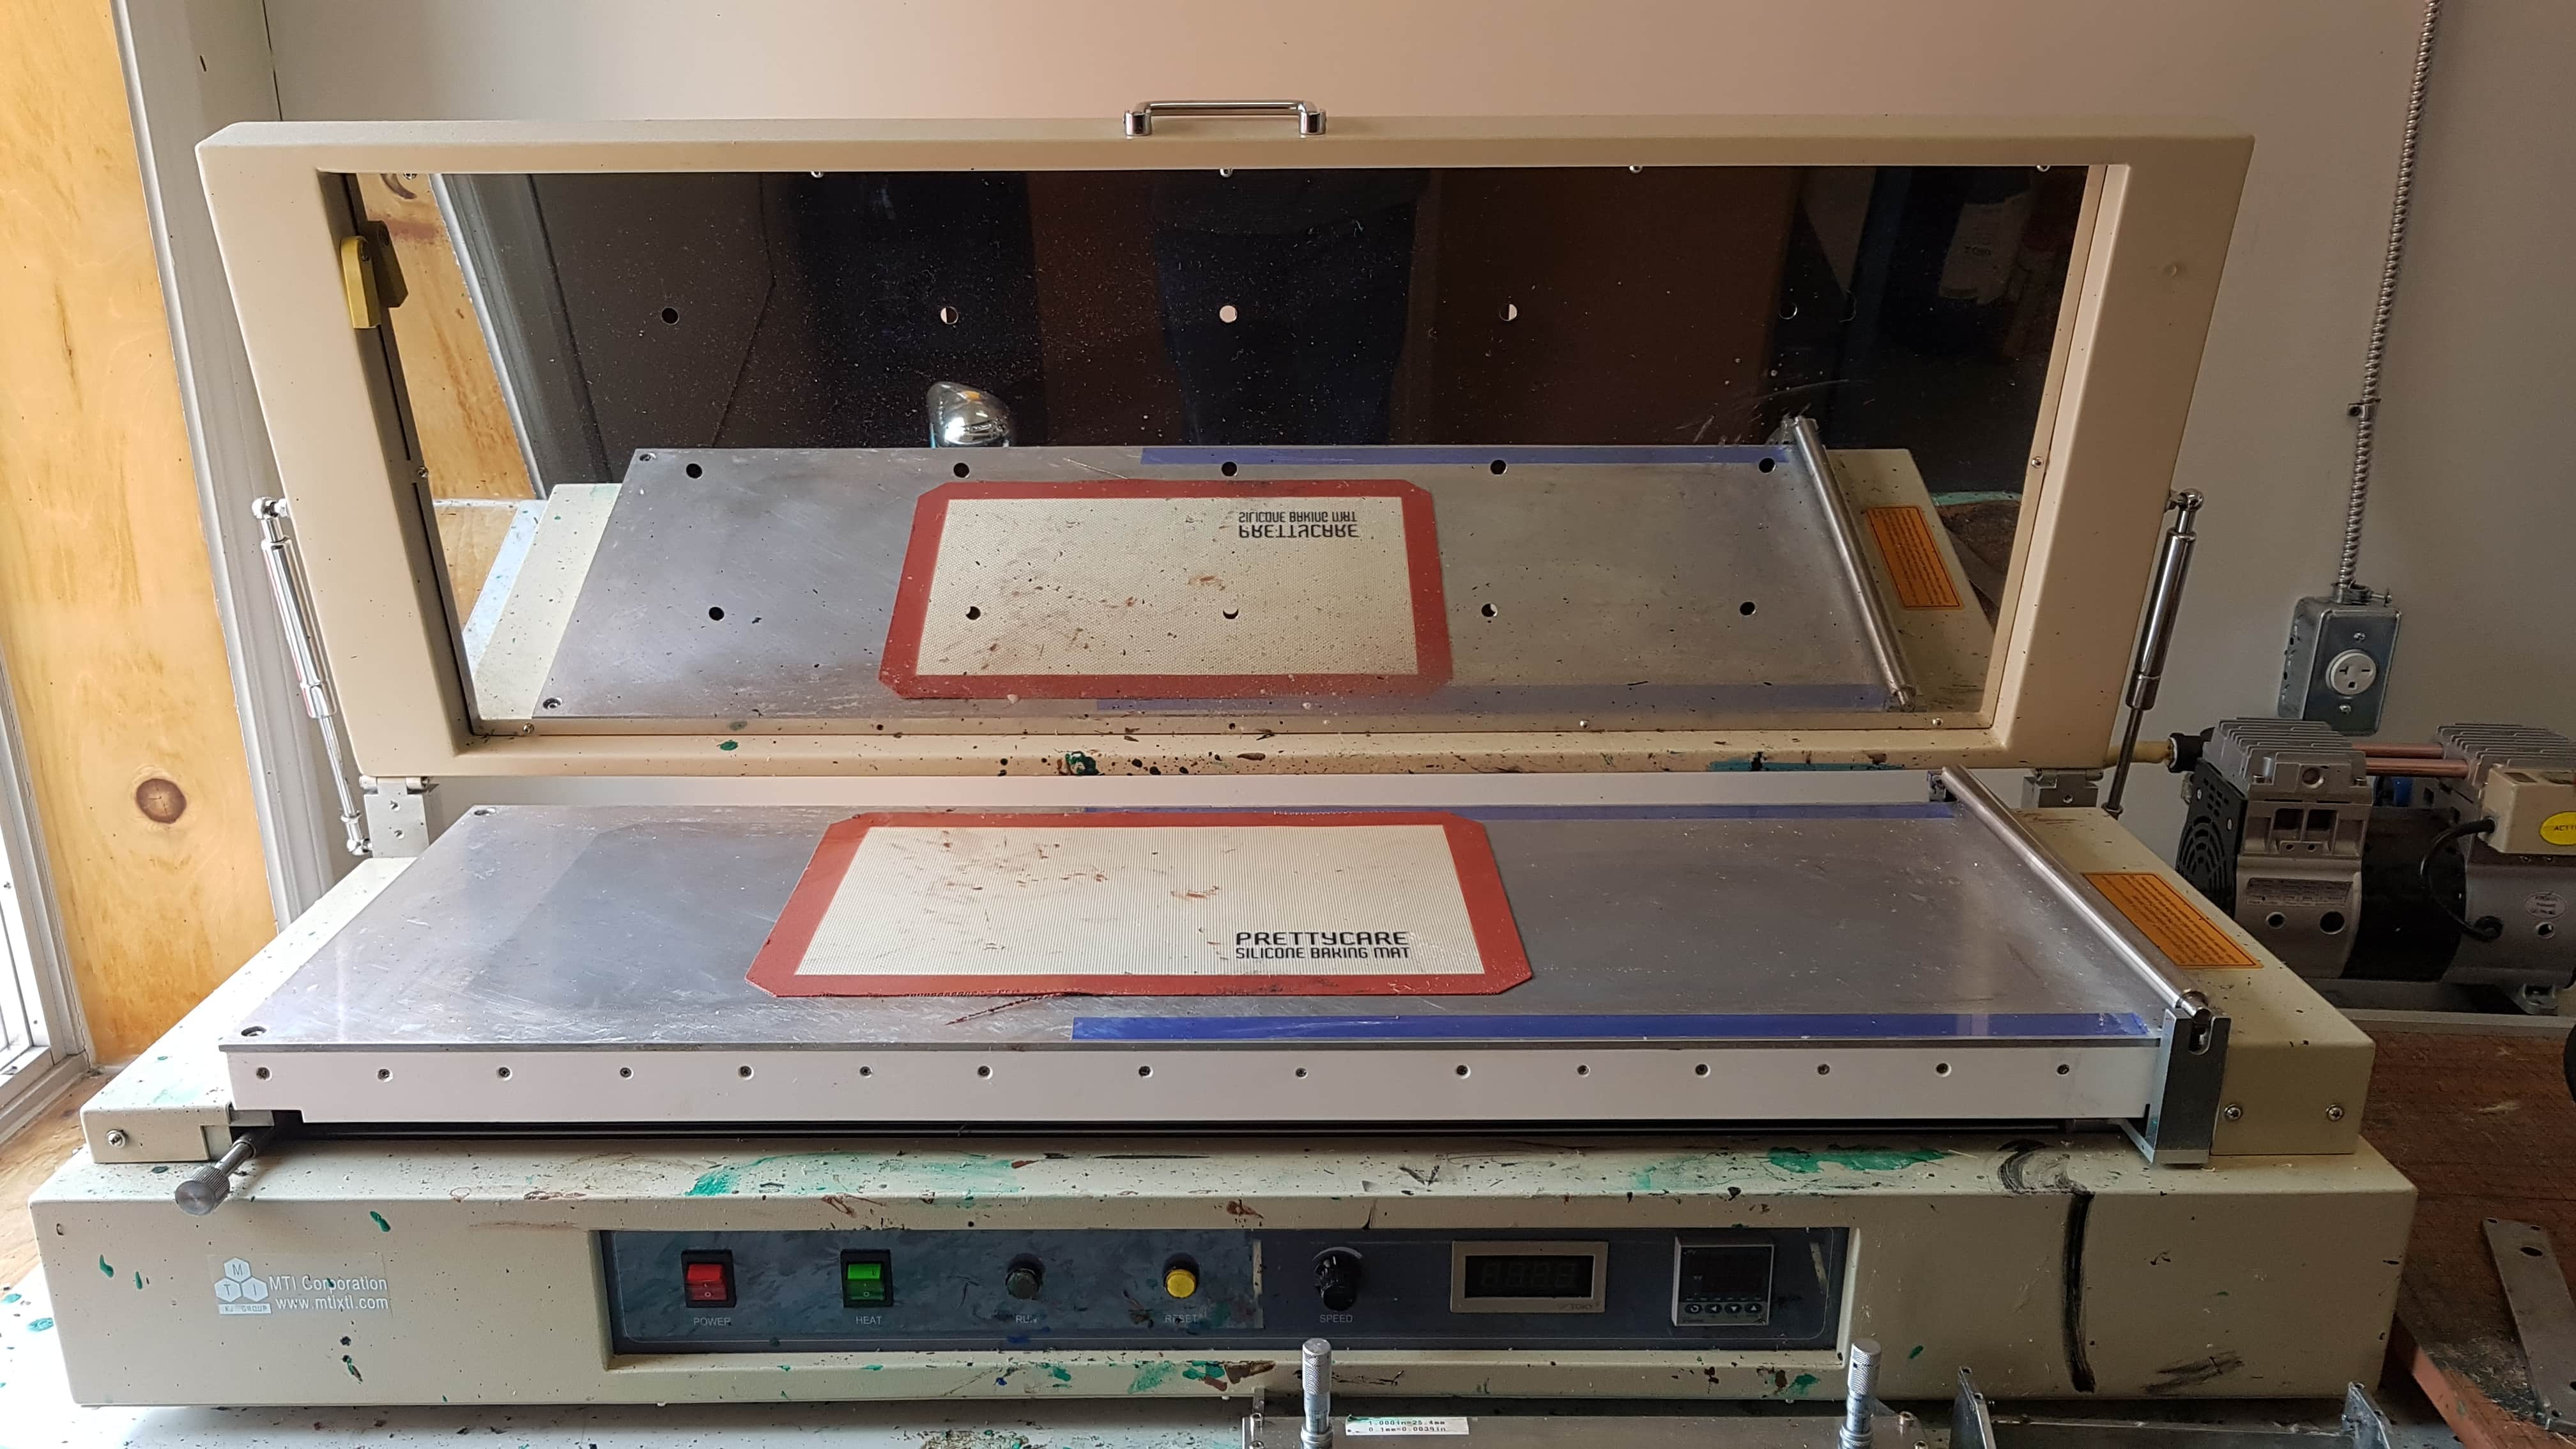 Large Tape Casting Sheet Coater (14”Wx40”L) w/ 120°C Heat-able Vac. Bed & Doctor Blade